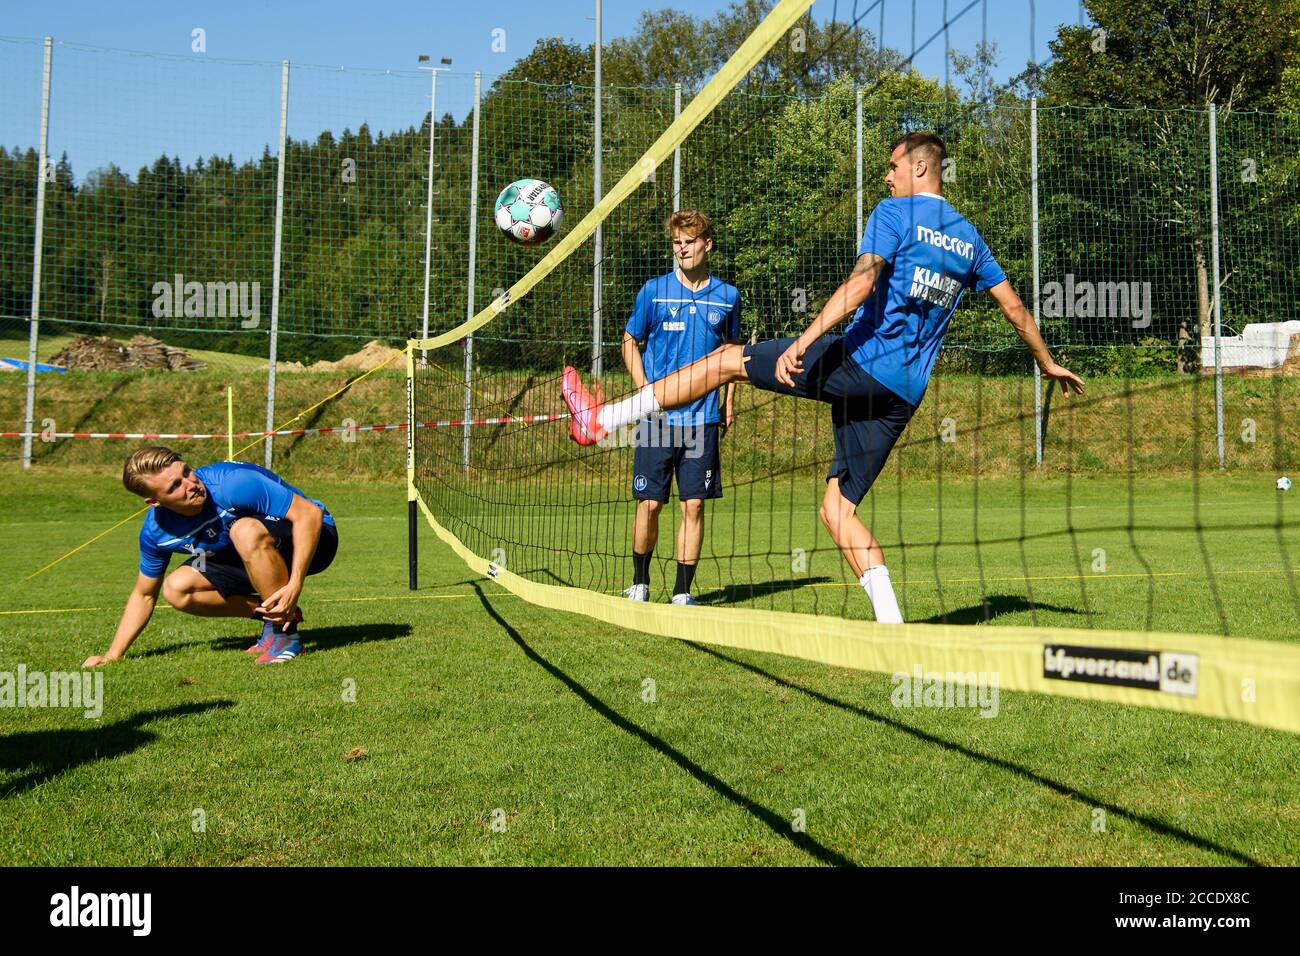 Philip Heise (KSC) on the ball. Left Marco Thiede (KSC), center: Dominik Kother (KSC). The training session on afterwithtag takes place on a field in Vorderweissach, where the KSC plays football tennis for a change. GES/Football/2. Bundesliga: Karlsruher SC - training camp, August 21, 2020 Football/Soccer: 2. Bundesliga: KSC training camp, Bad Leonfelden, Austria, August 21, 2020 | usage worldwide Stock Photo